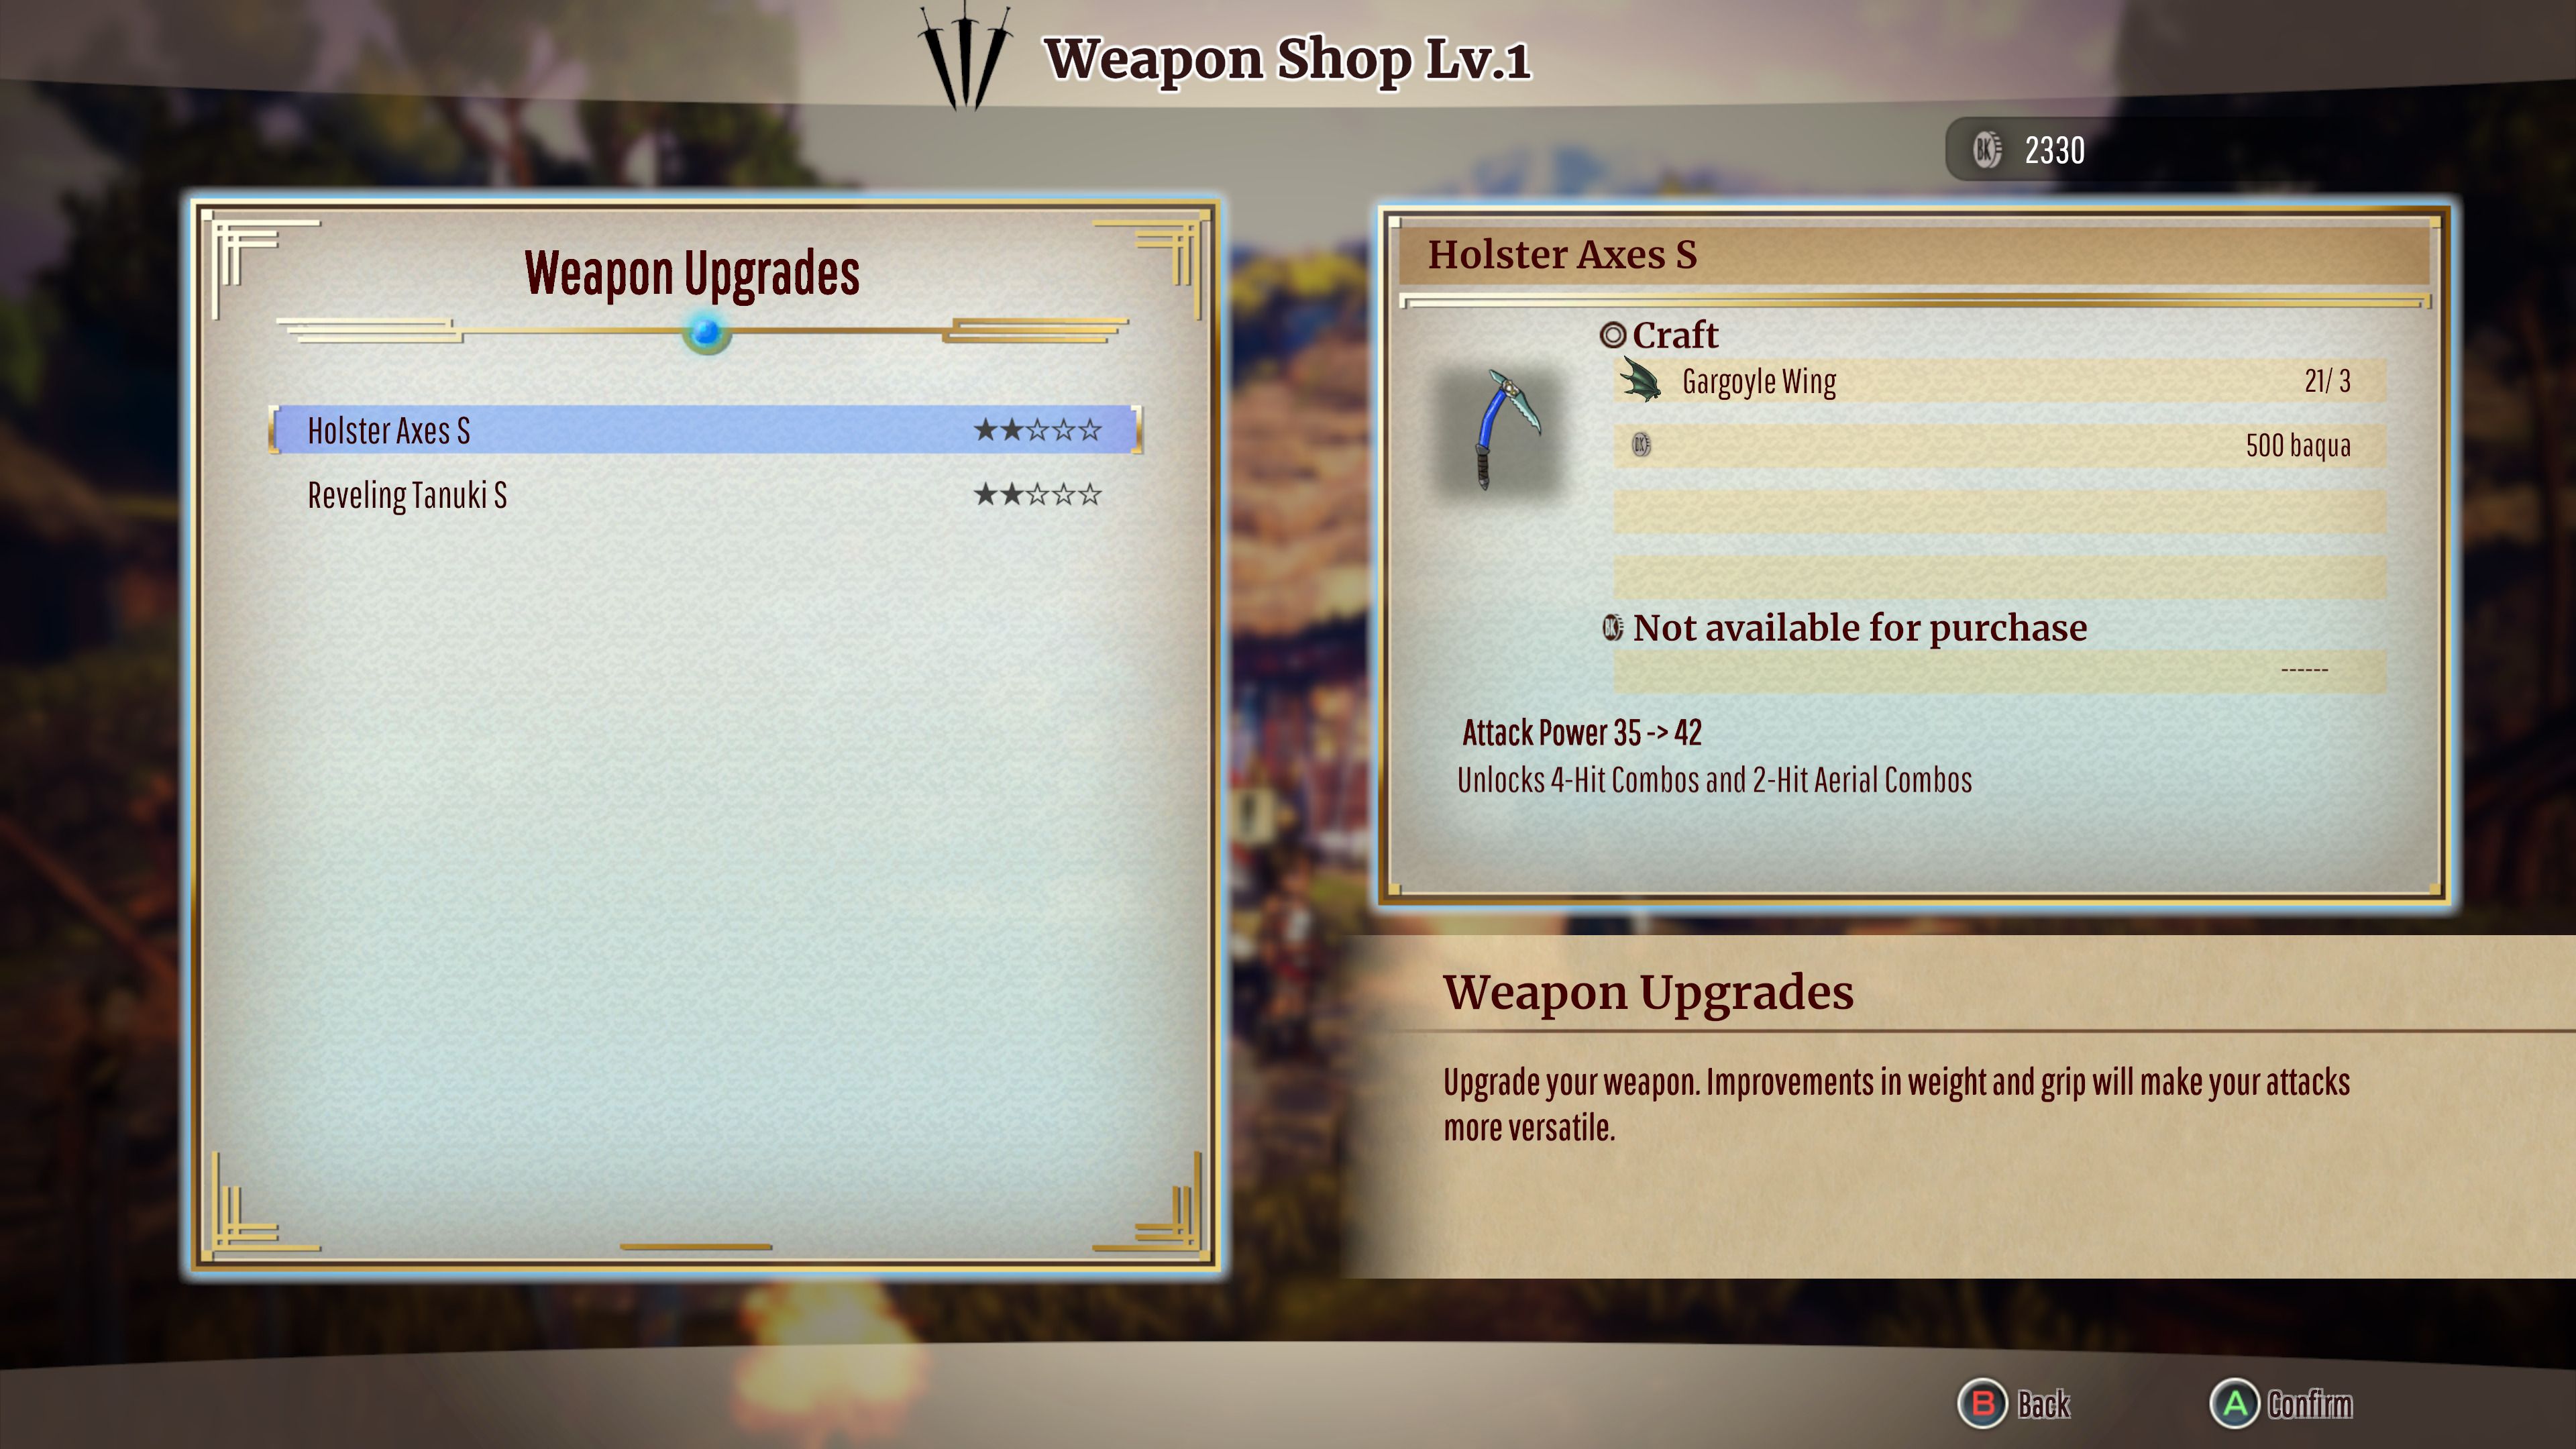 The upgrades available on the shop level 1.